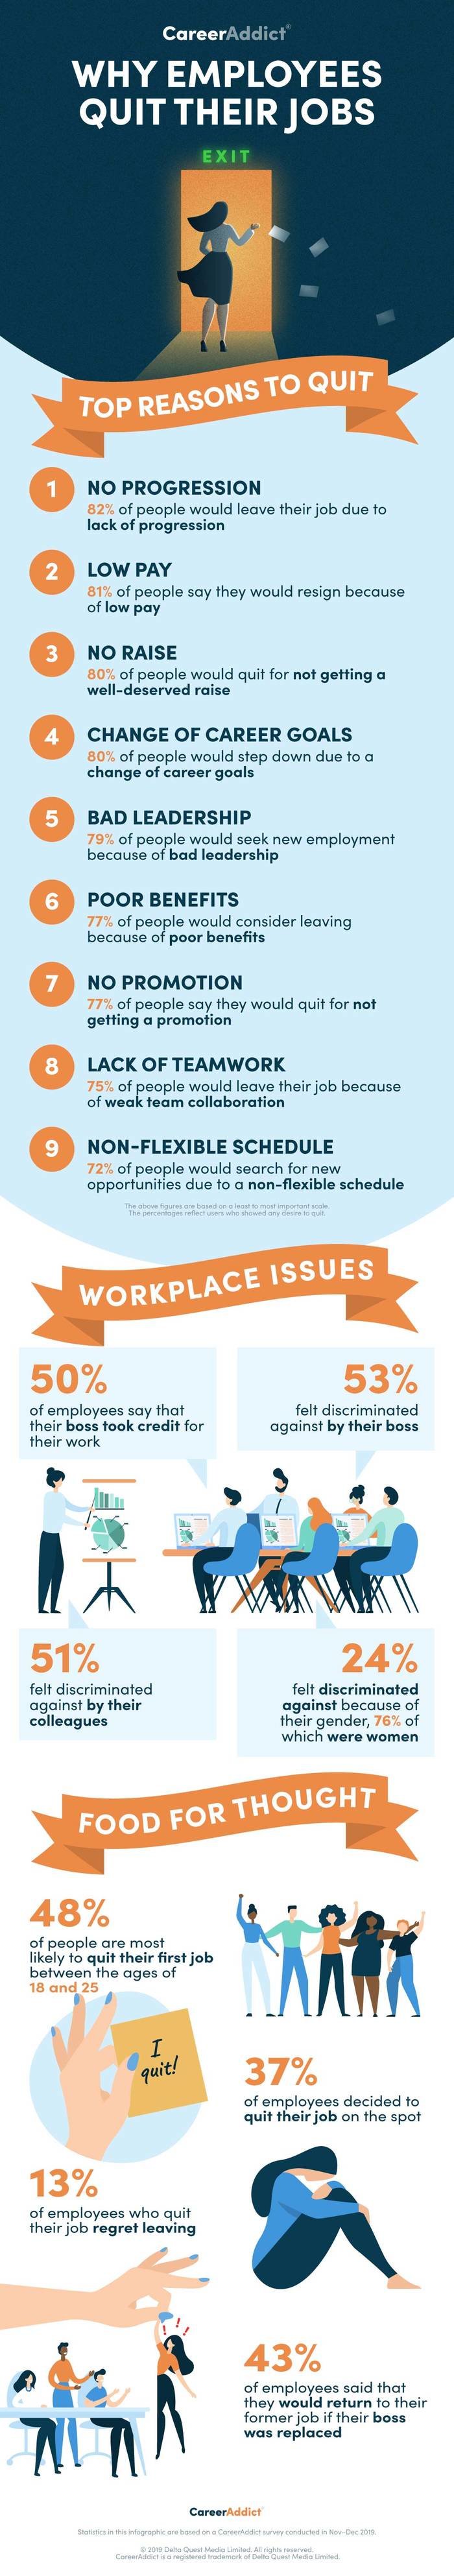 Staying Power: Why Your Employees Leave and How to Keep Them